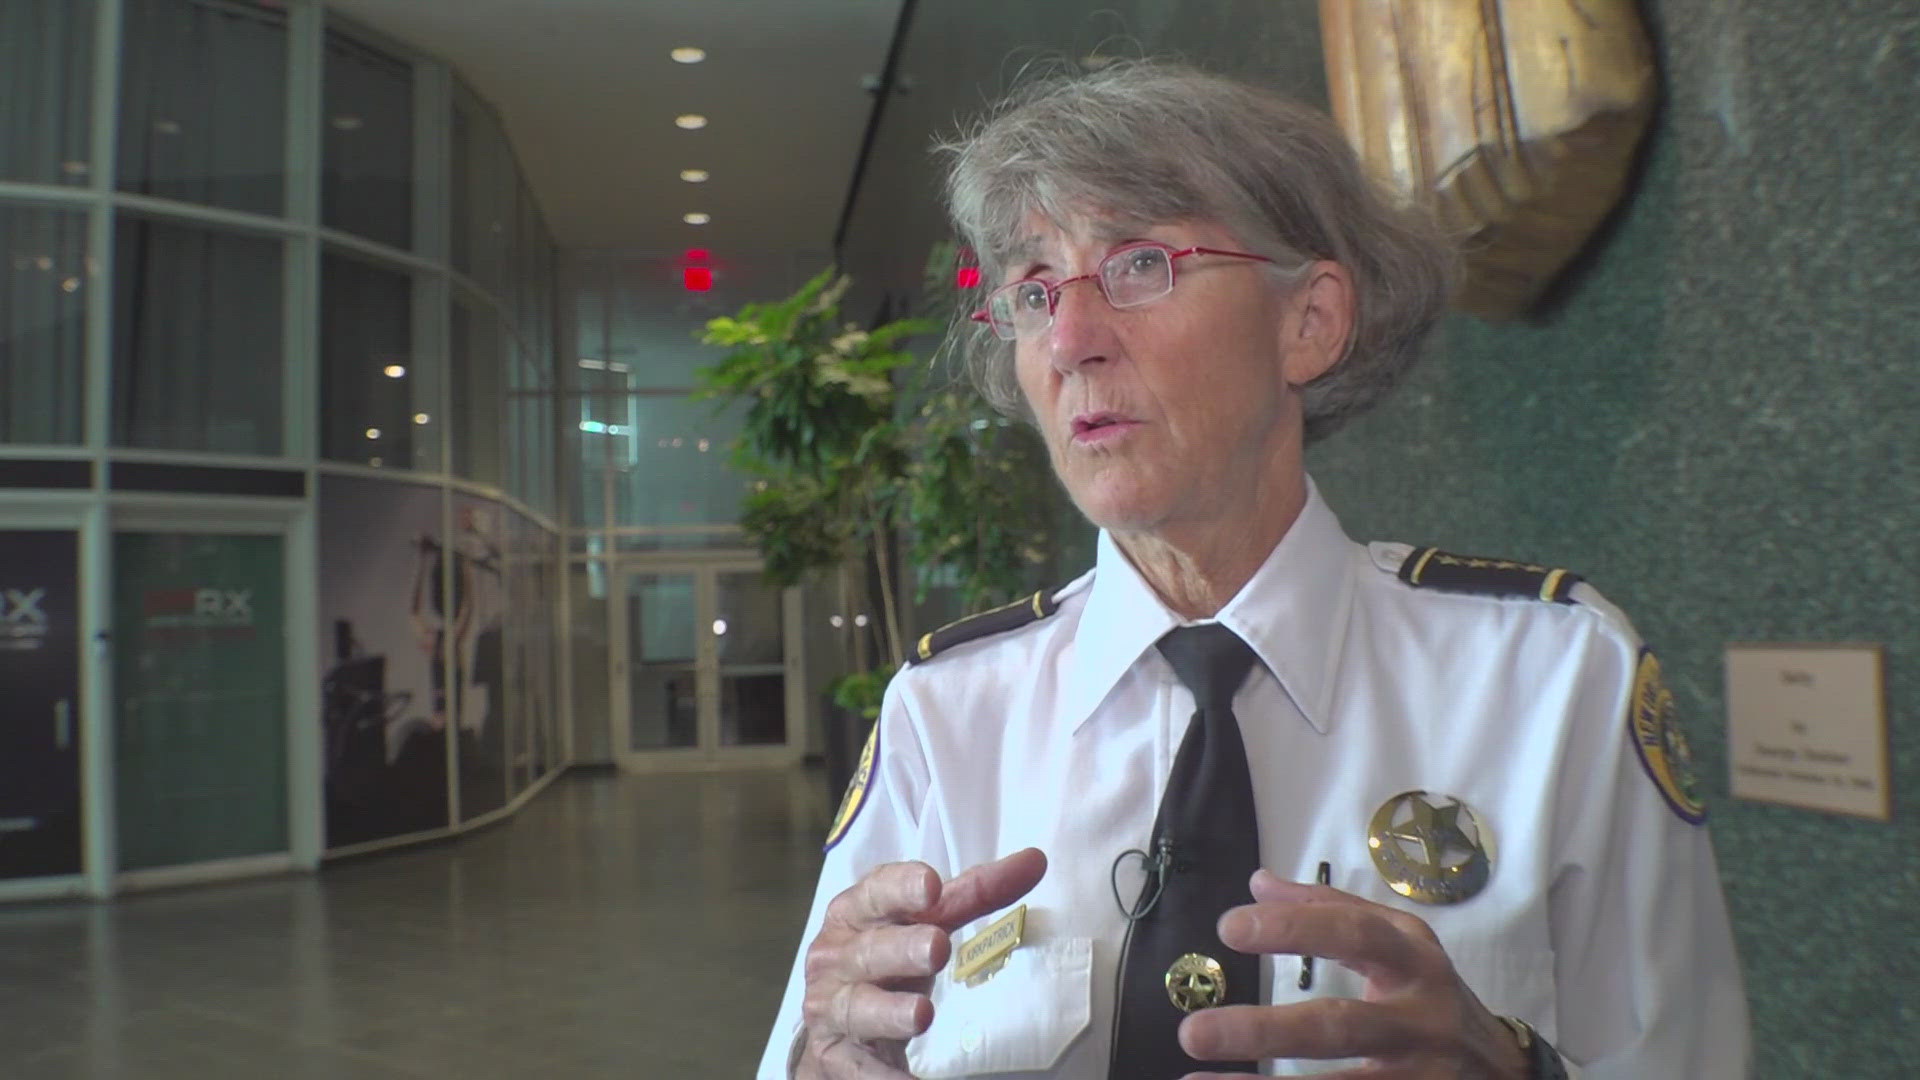 NOPD Superintendent Anne Kirkpatrick gave more details on a plan to keep the Quarter safe from gun violence, even after concealed carry goes into effect.